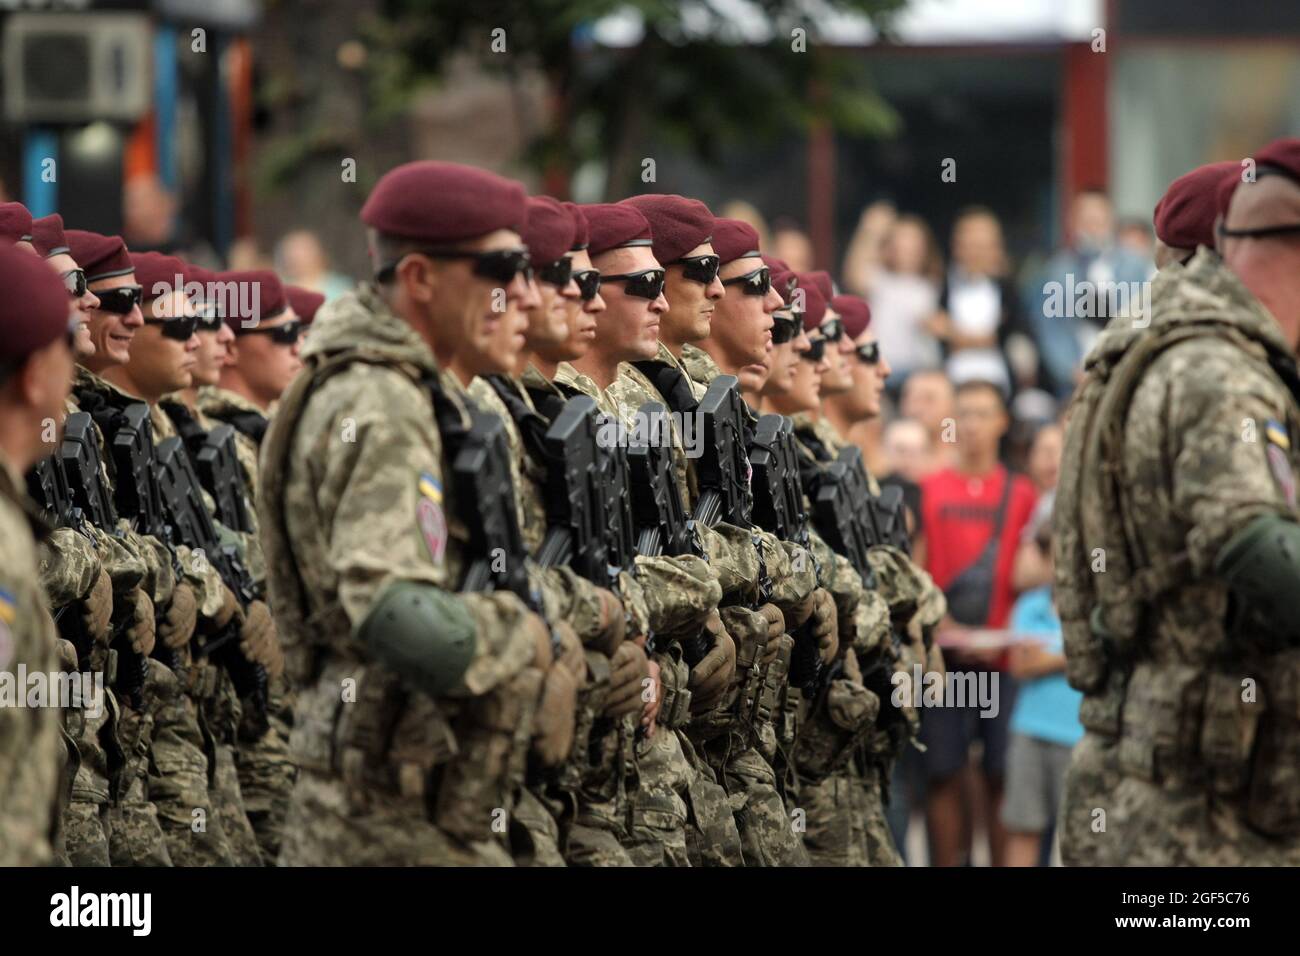 Non Exclusive: KYIV, UKRAINE - AUGUST 22, 2021 - Servicemen are pictured during the rehearsal of the parade for the 30th anniversary of the Independen Stock Photo